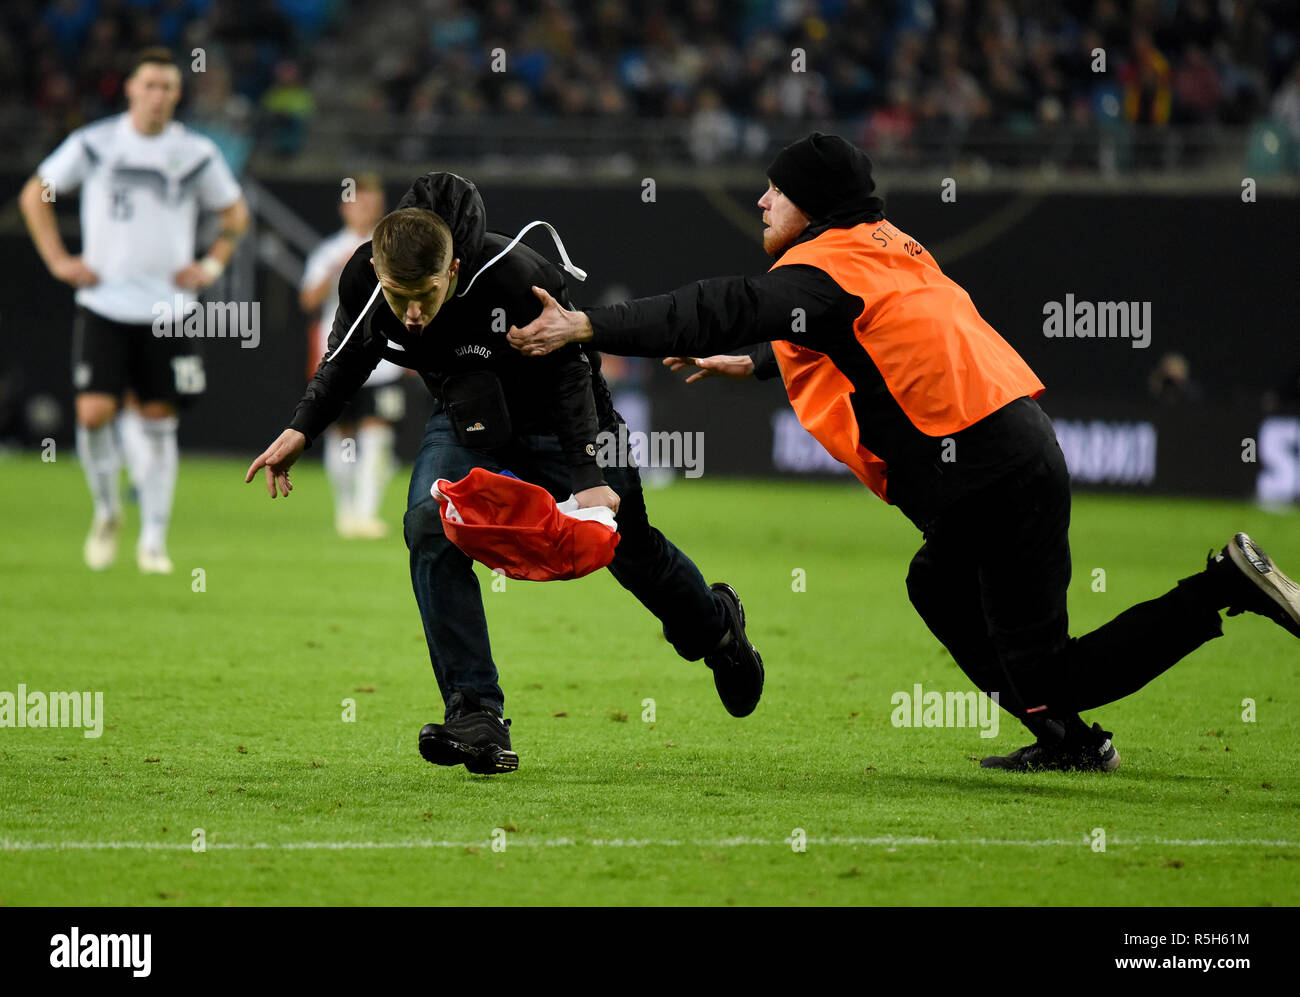 Leipzig, Germany - November 15, 2018. A Russia fan chased by a steward after running onto the pitch during international friendly Germany vs Russia in Stock Photo